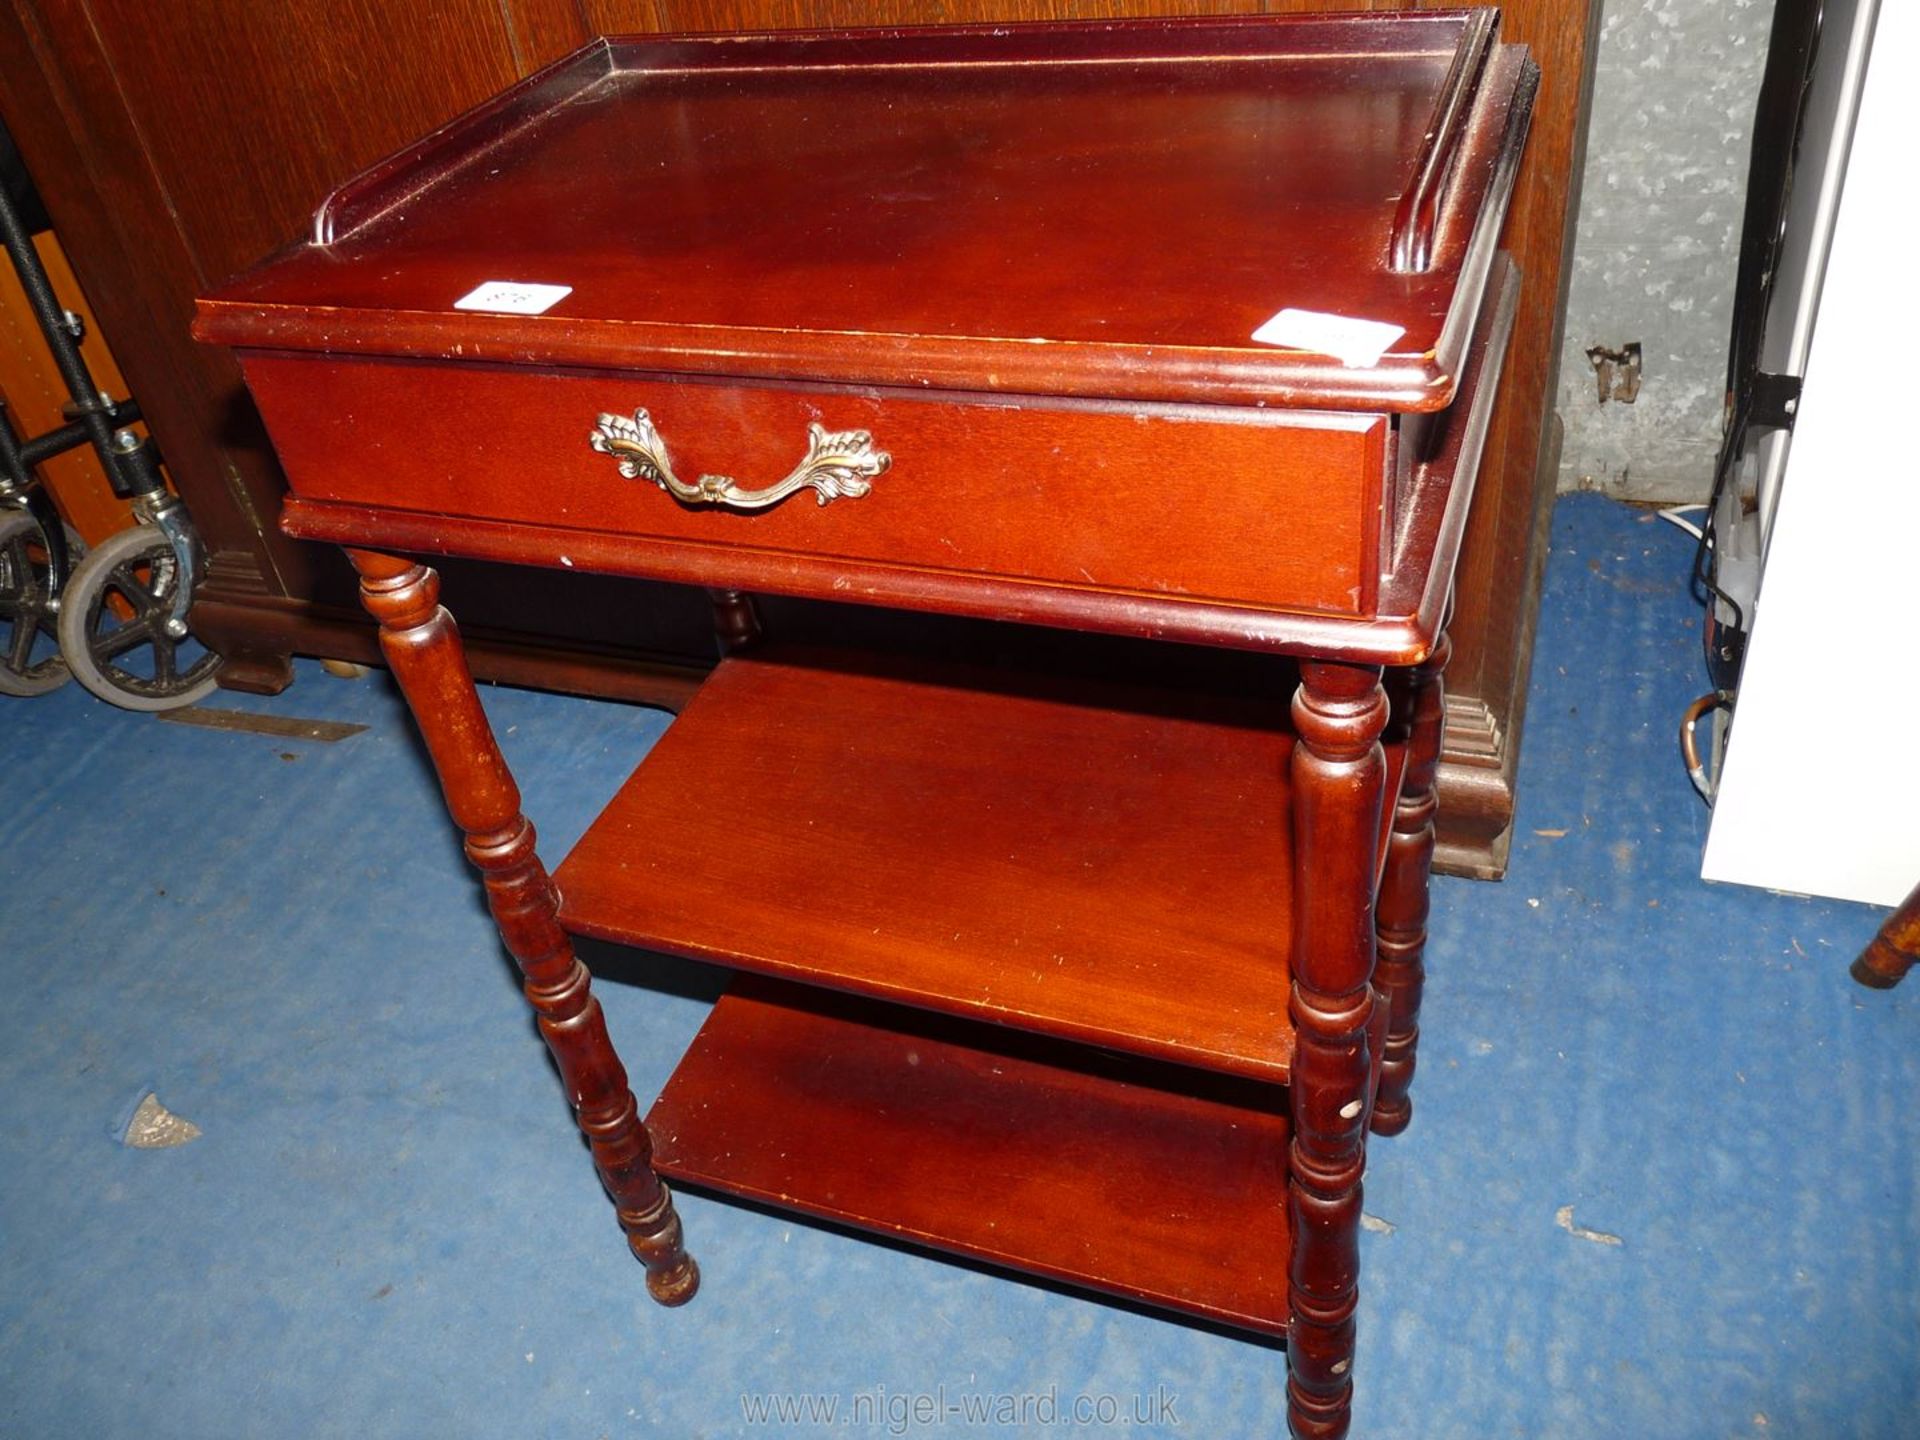 A darkwood hall table with two shelves and drawer, 18 1/2" wide x 1 3/4" deep x 27" high.